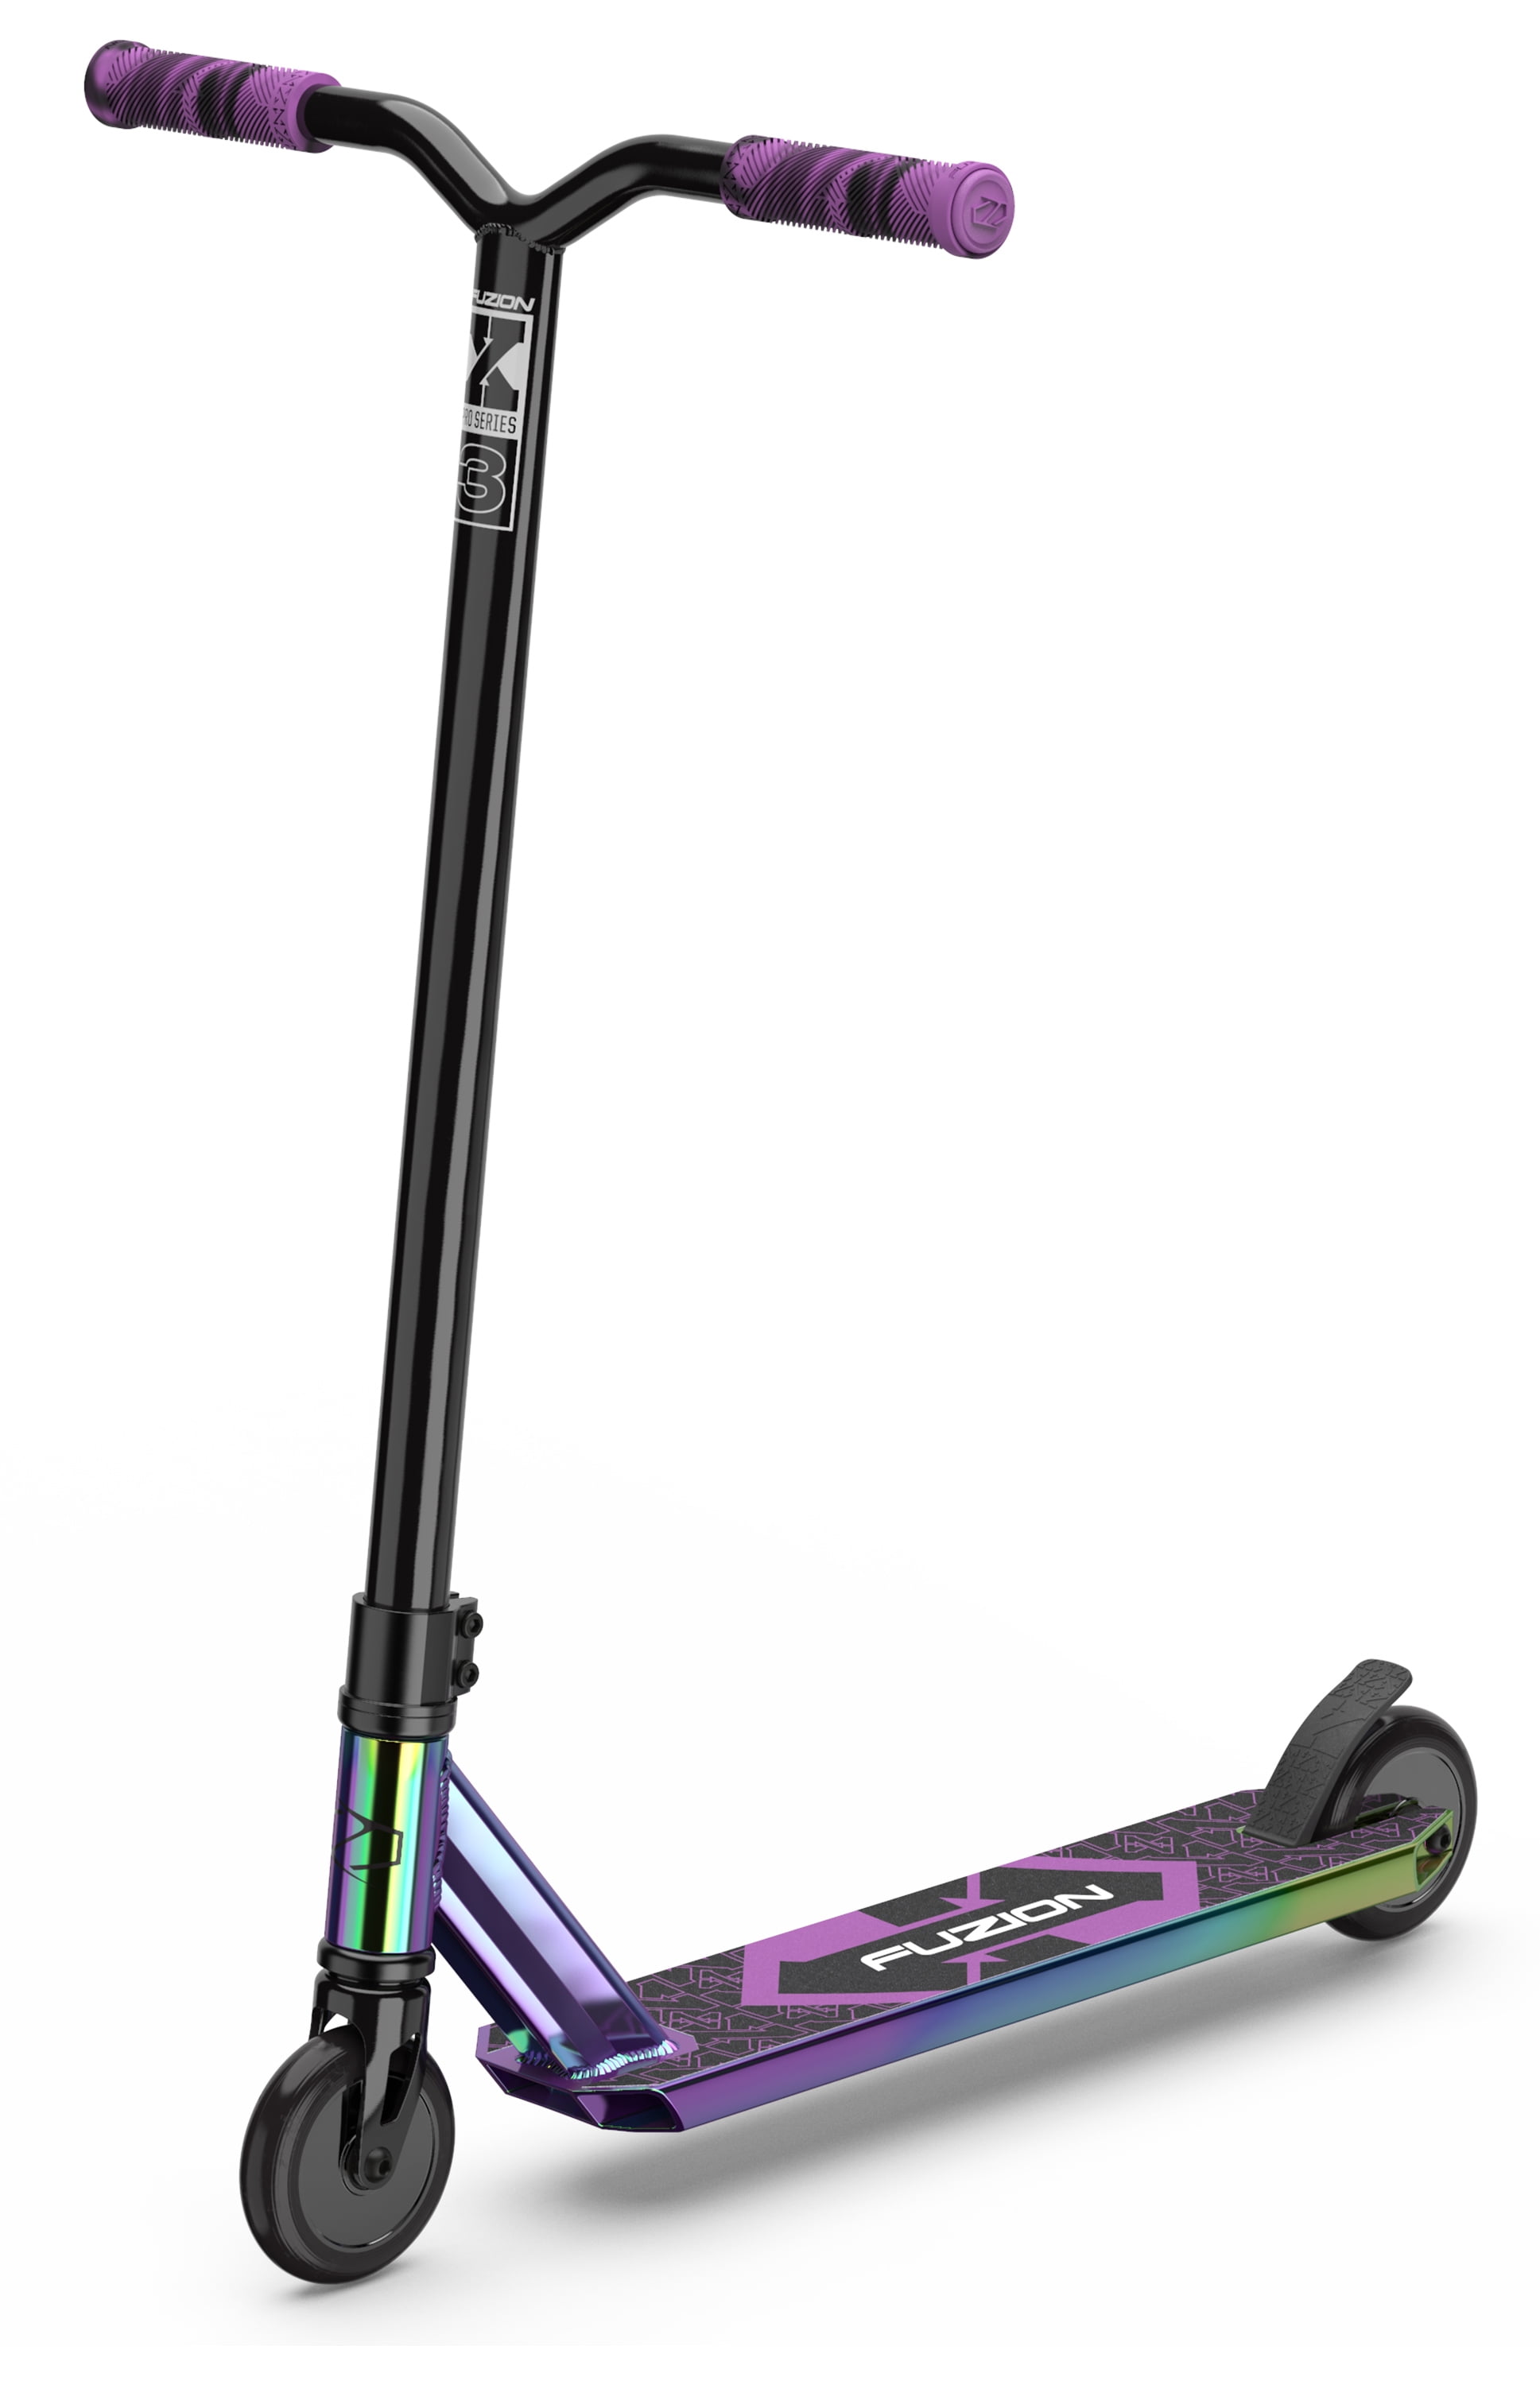 Trick Scooter Beginner Stunt Scooters for Kids 8 Years and Up Fuzion X-3 Pro Scooters Quality Freestyle Kick Scooter for Boys and Girls